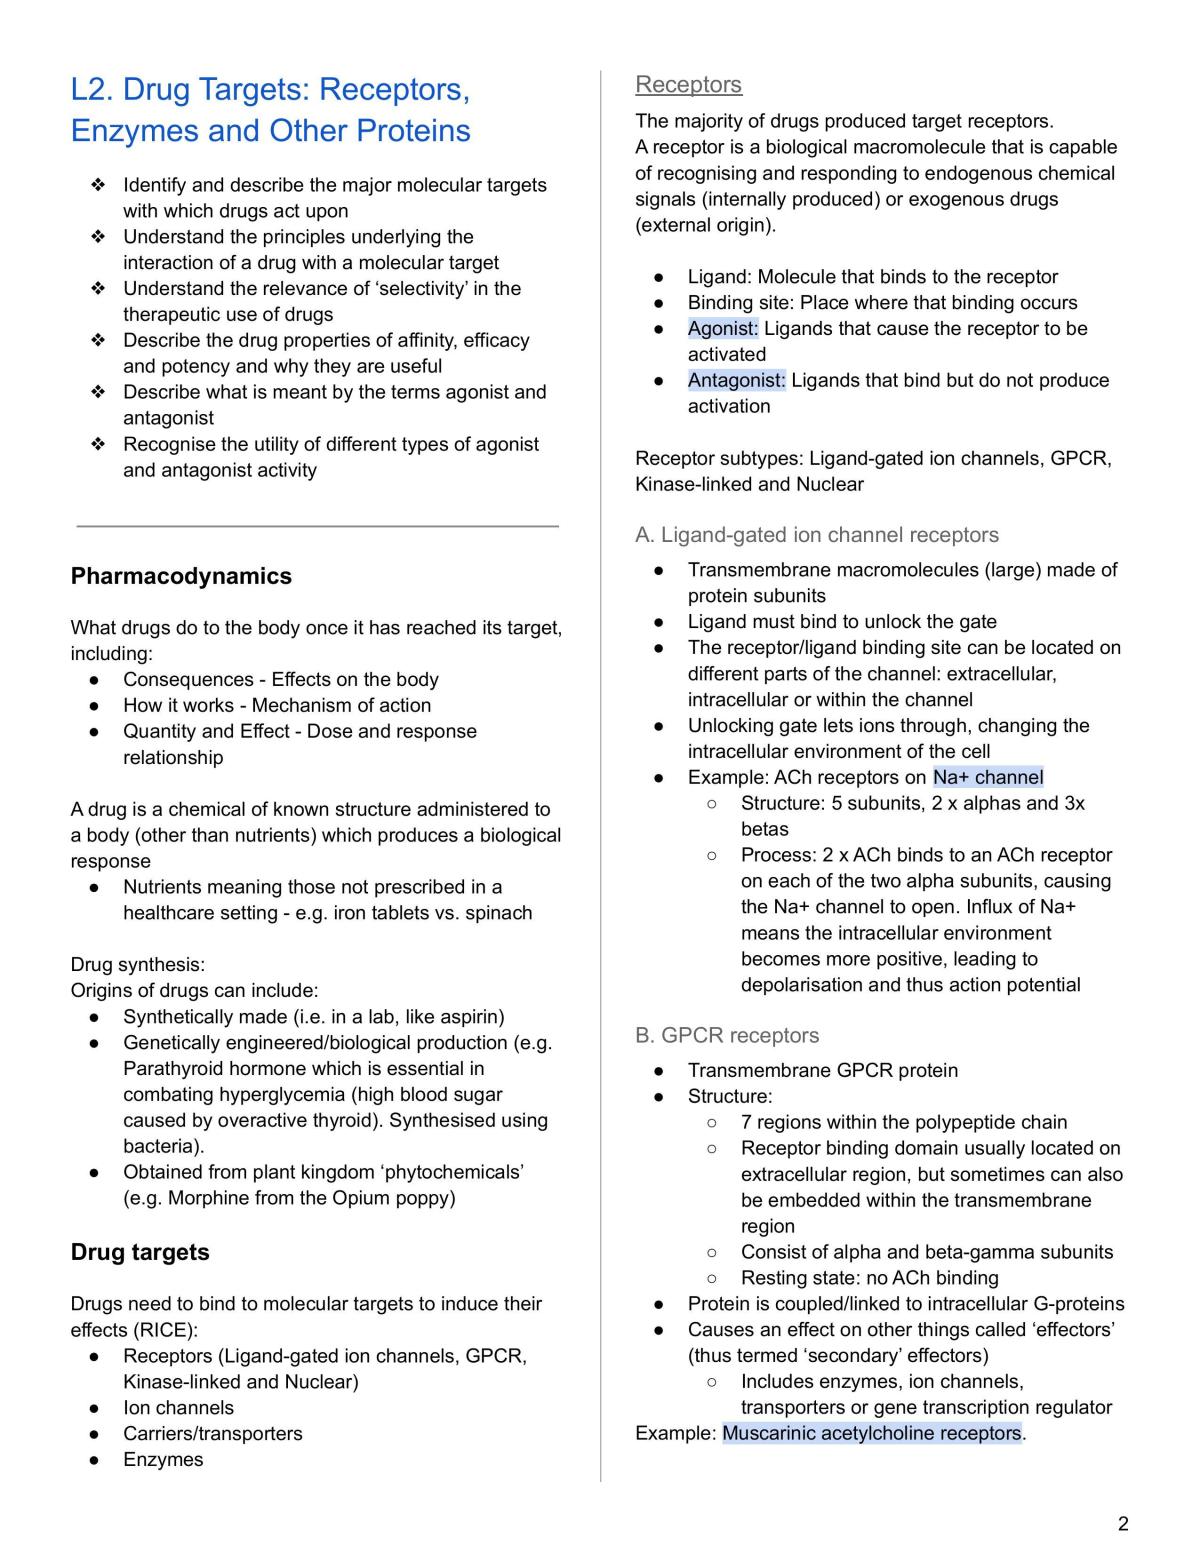 L1-18: PHRM20001 - Pharmacology - Page 2